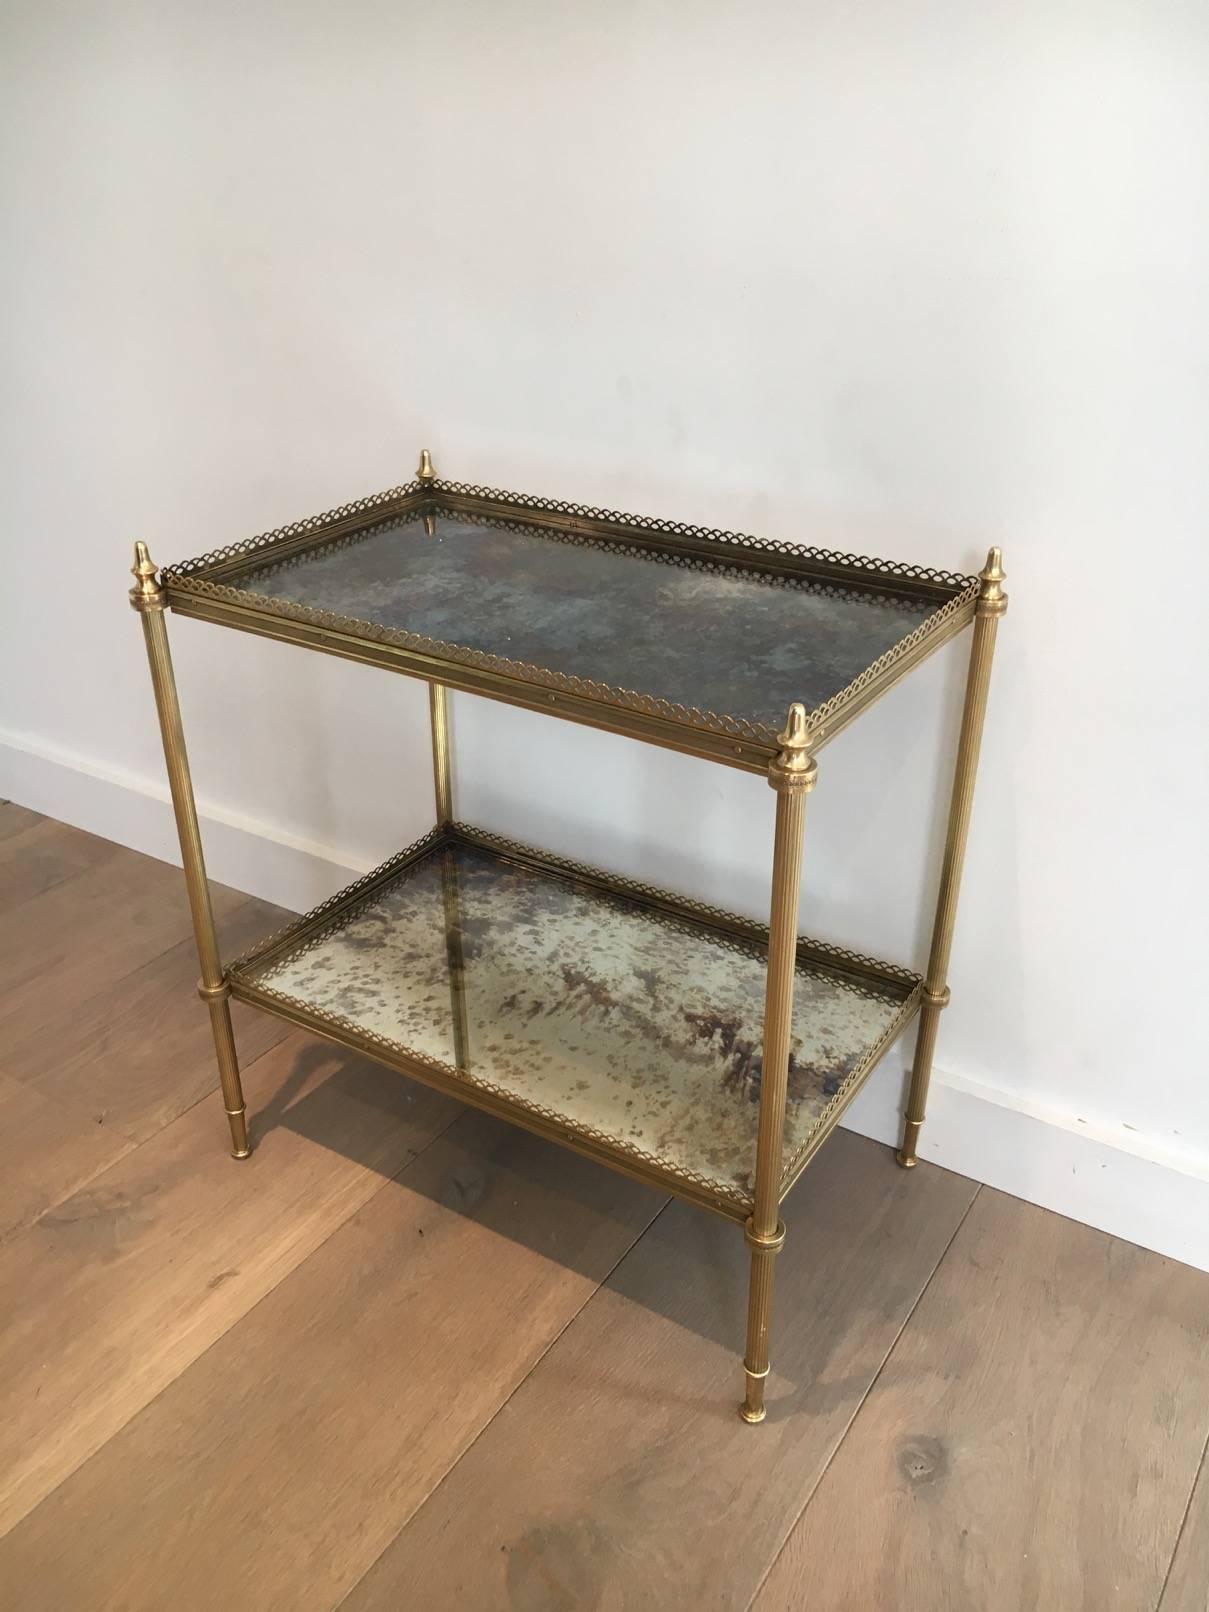 French 1940s two-tiered side table with gallery. The table is made of brass with antiqued mirror shelves. 

This table is currently in France, please allow 3 to 6 weeks delivery. Price includes delivery to our warehouse in Long Island City, NY